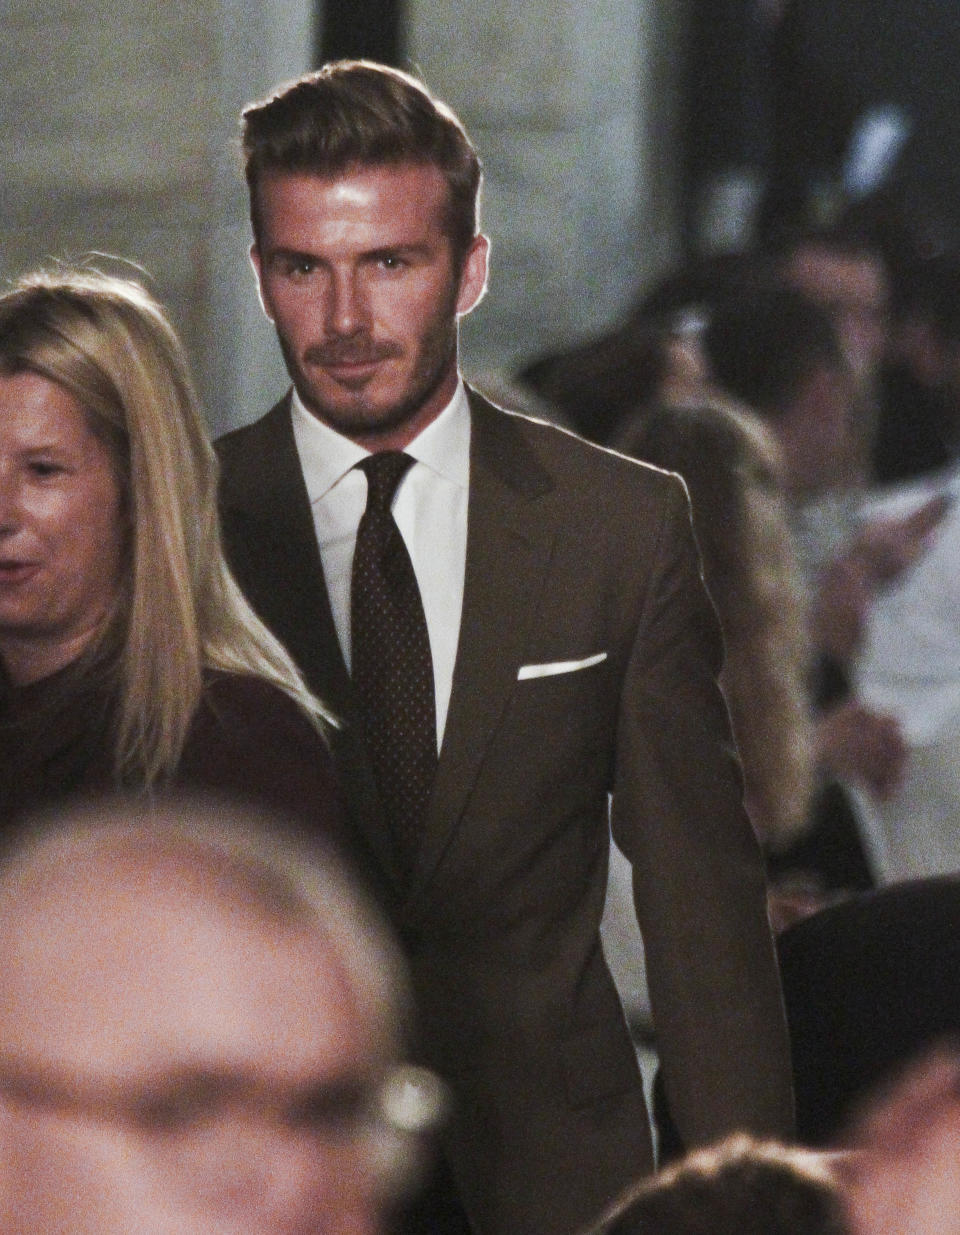 David Beckham arrives at the show for Victoria Beckham's Spring 2013 fashion collection on Sunday, Sept. 9, 2012 in New York. (AP Photo/Bebeto Matthews)